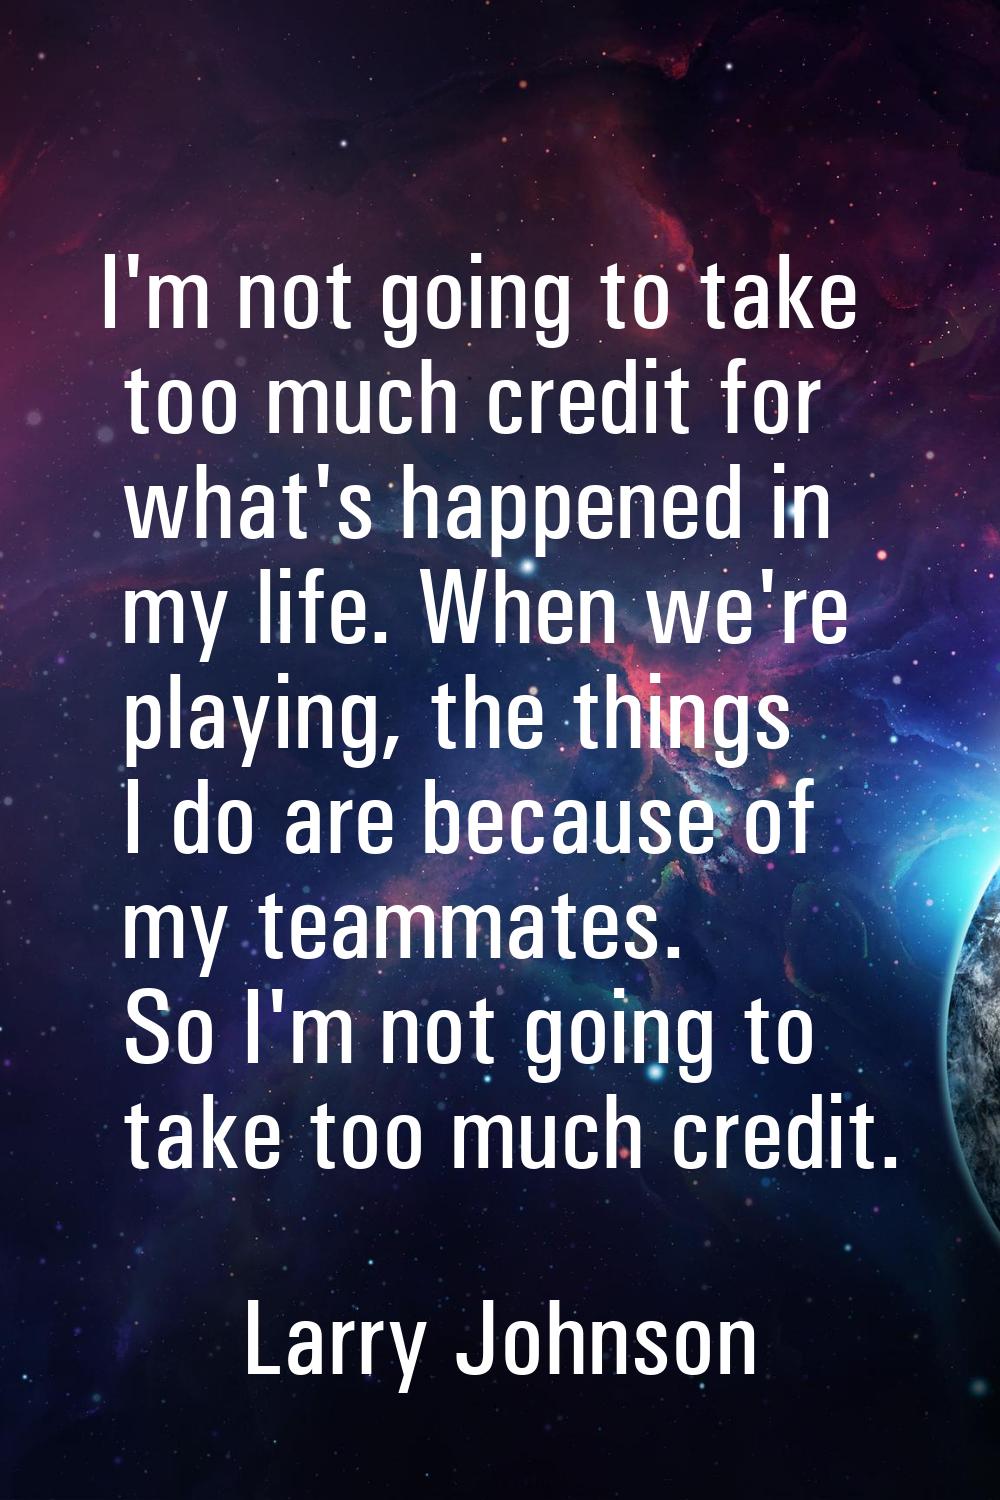 I'm not going to take too much credit for what's happened in my life. When we're playing, the thing